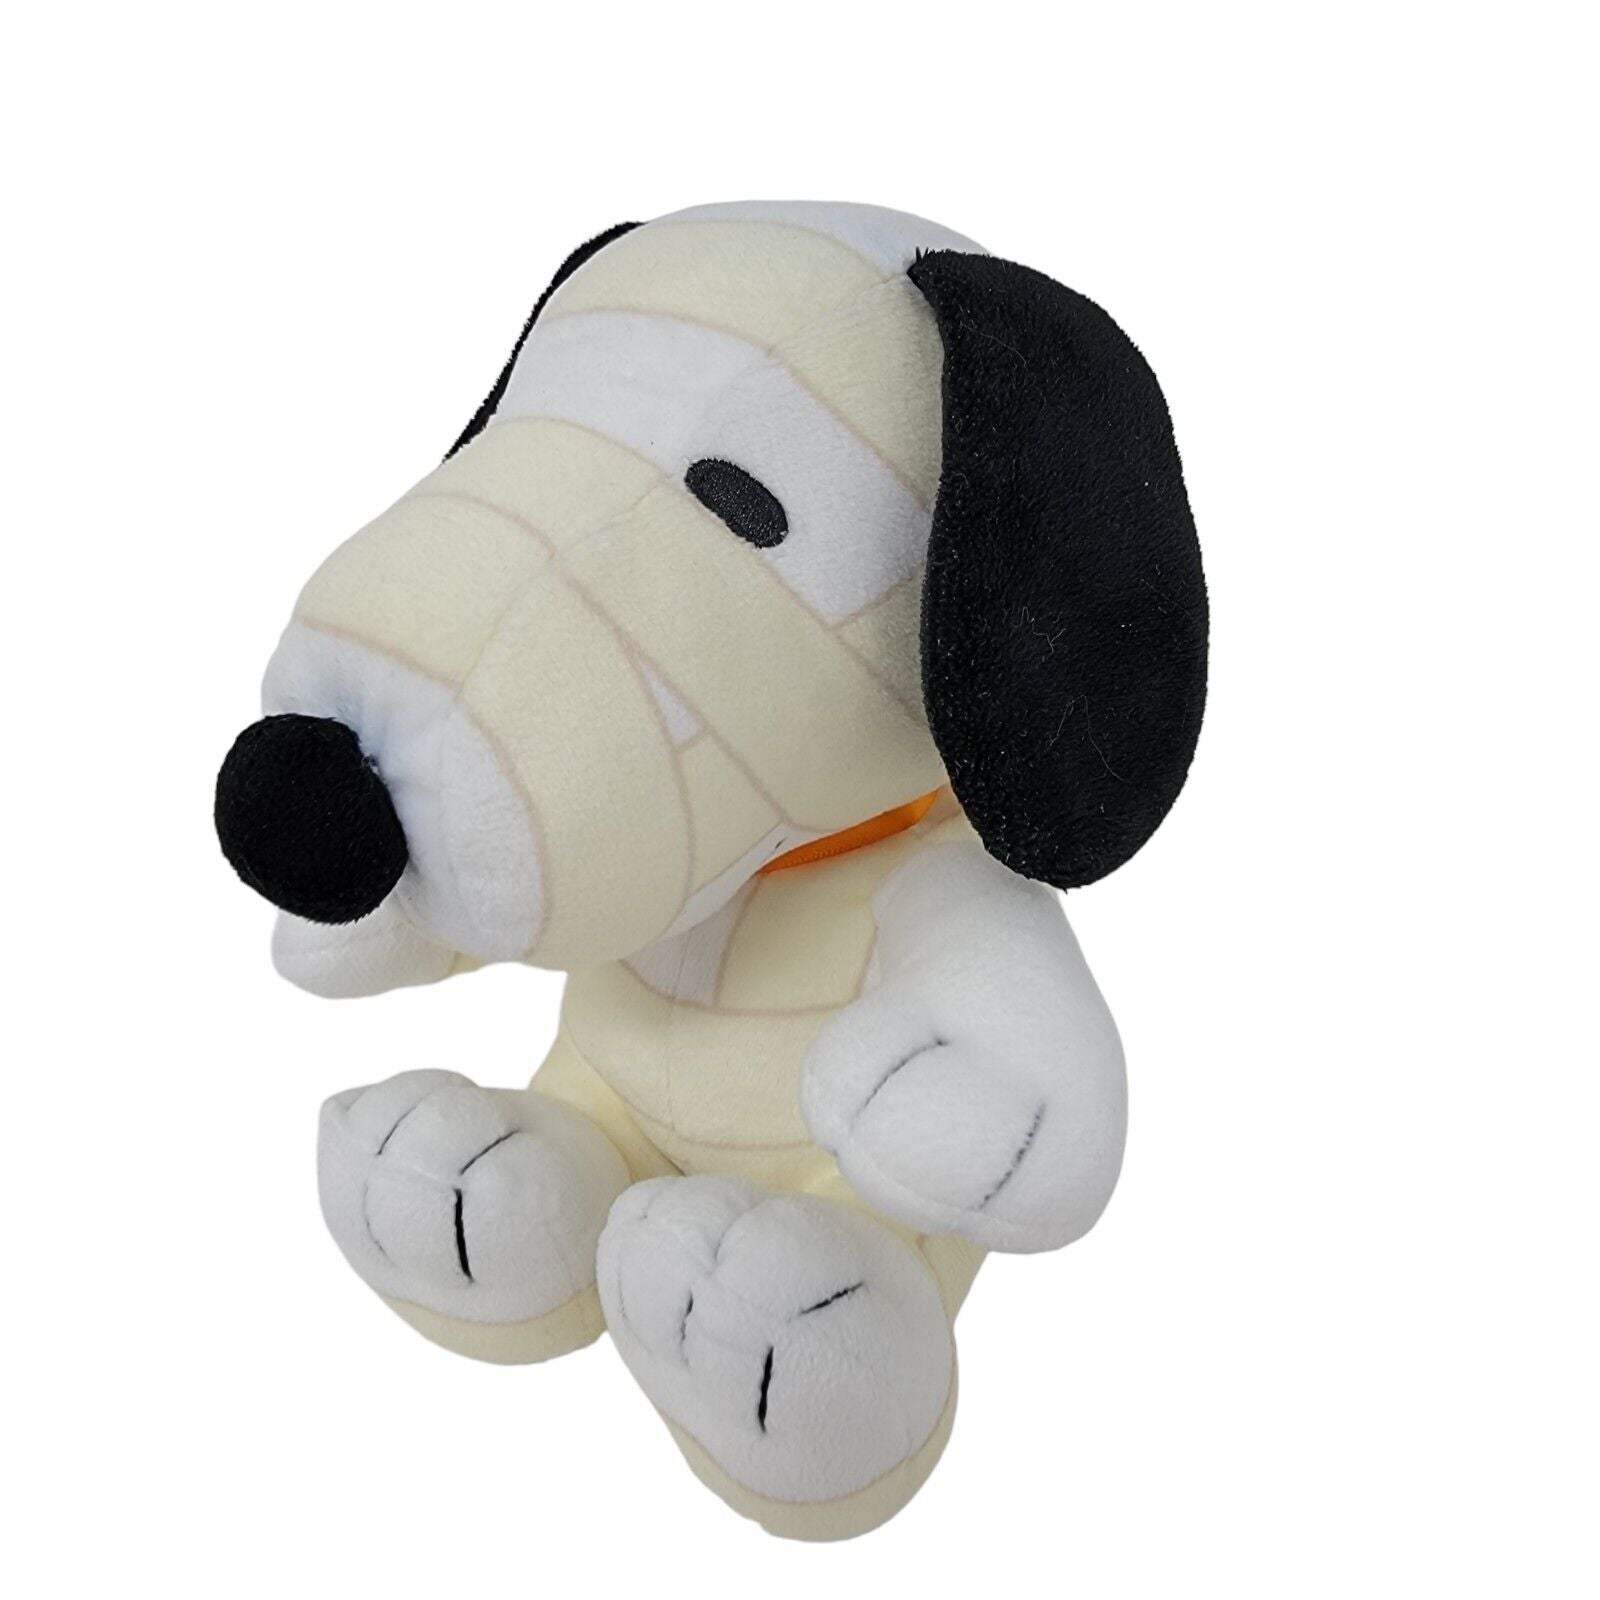 Small 'Toon Town Dog Toy from Movies, Books, Cartoons: 6